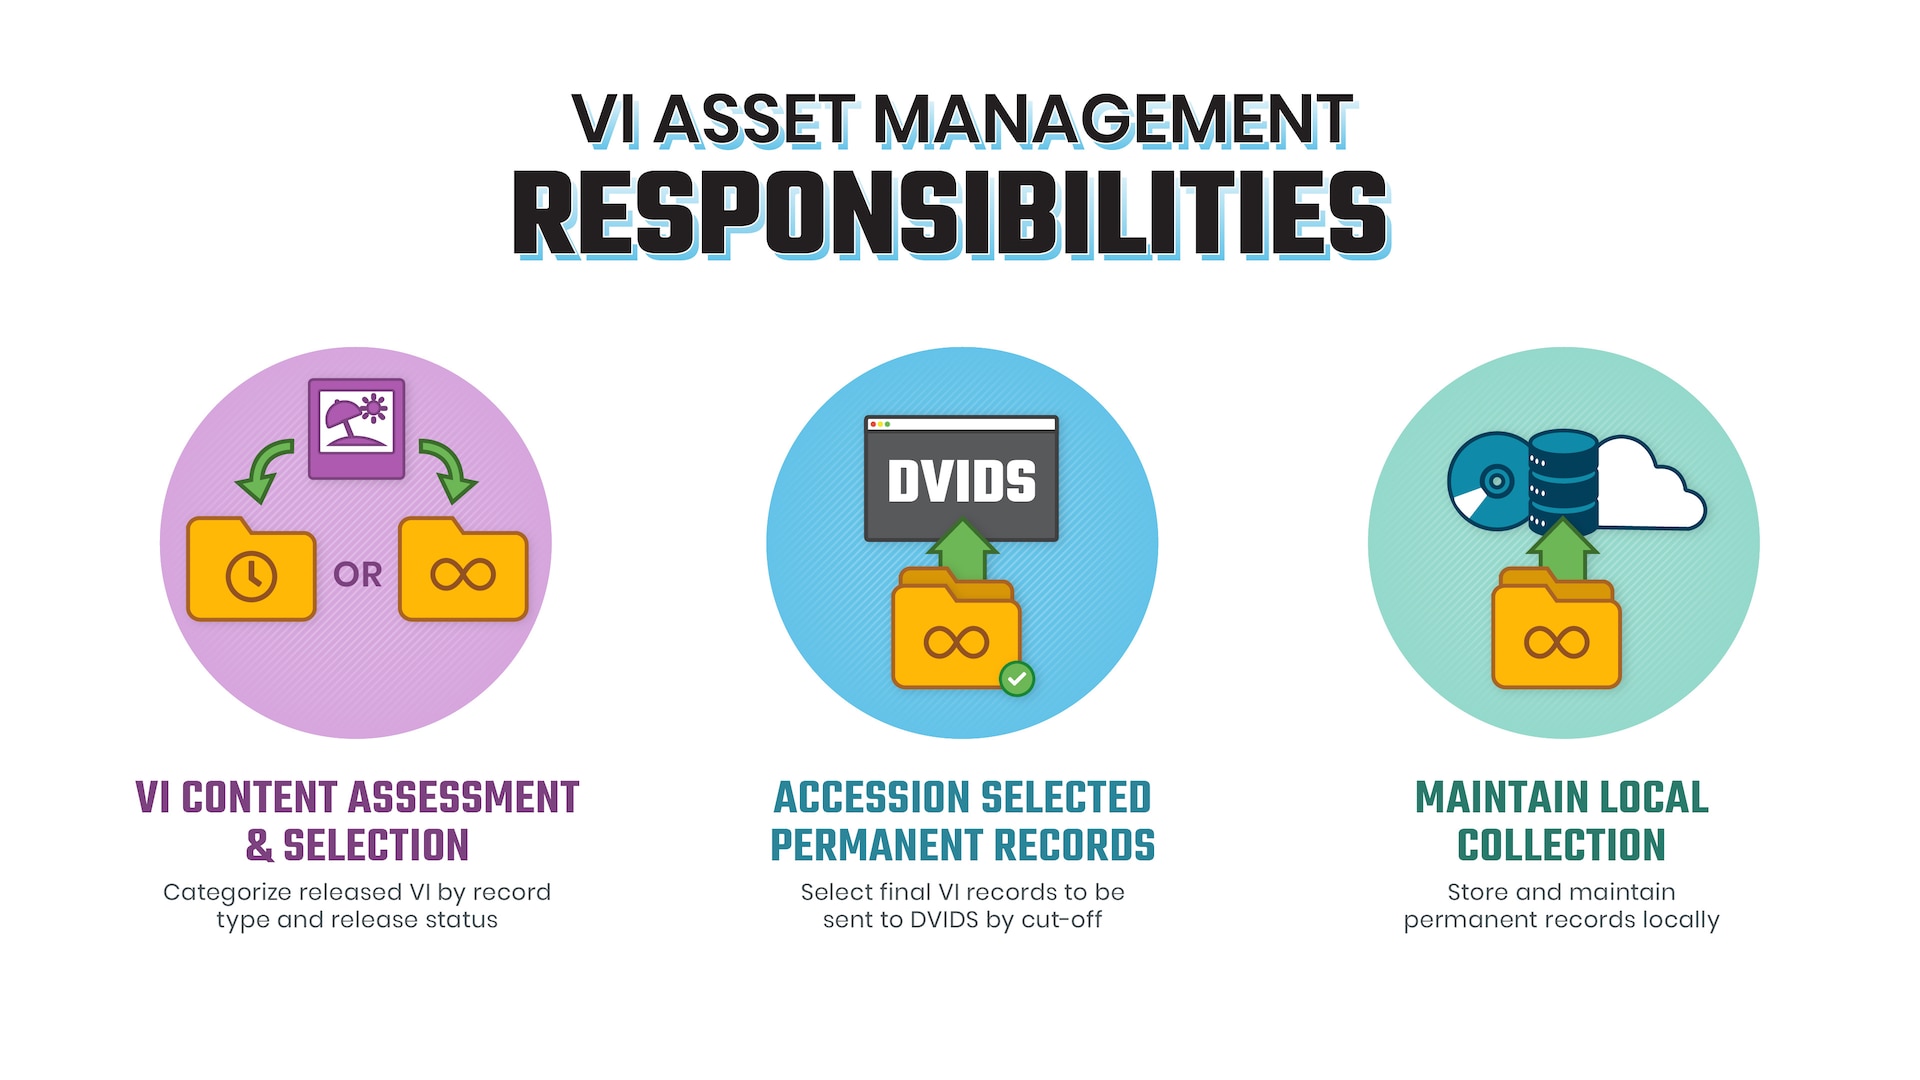 Graphic shows VI asset management responsibilites of assessing and selecting VI content by categorizing VI by record type and release status then accessioning selected VI record to DVIDS by the cut-off date. Then continuing to maintain the local collection.